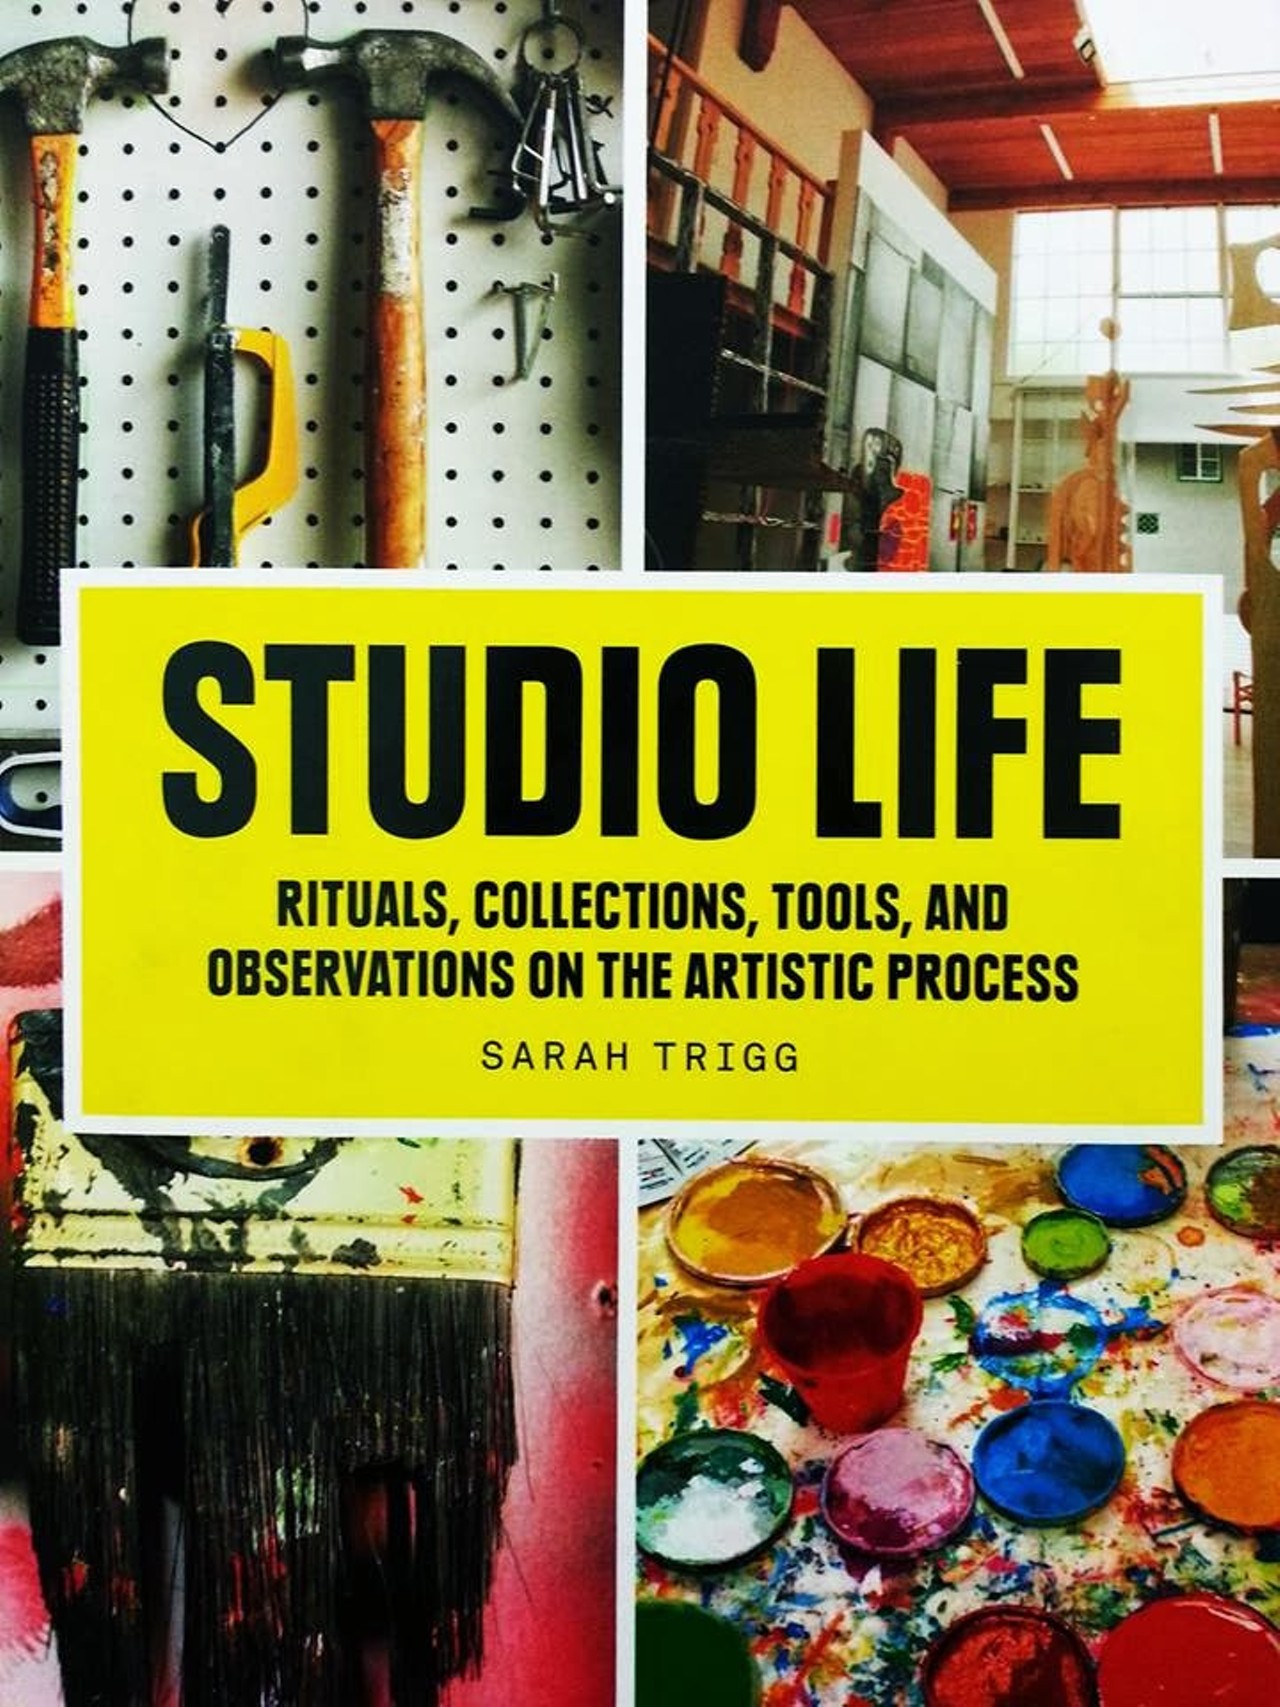 Sarah Trigg comes to the Museum of Contemporary Art today to talk about her new book Studio Life, a collection of photographs depicting a hundred different visits with various artists around the United States as they share their objects and habits relating to their creative process. The six categories she documents are mascots, collected objects, rituals, makeshift tools, residue, and habitats. Each artist offers his or her own take on the categories, resulting in a fascinating, larger perspective of how they work. Many of the artists featured in the book have shown their work at MOCA before, including the artist behind current exhibition I Work From Home, Michelle Grabner. The event is free and begins at 1 p.m. (Trenholme).